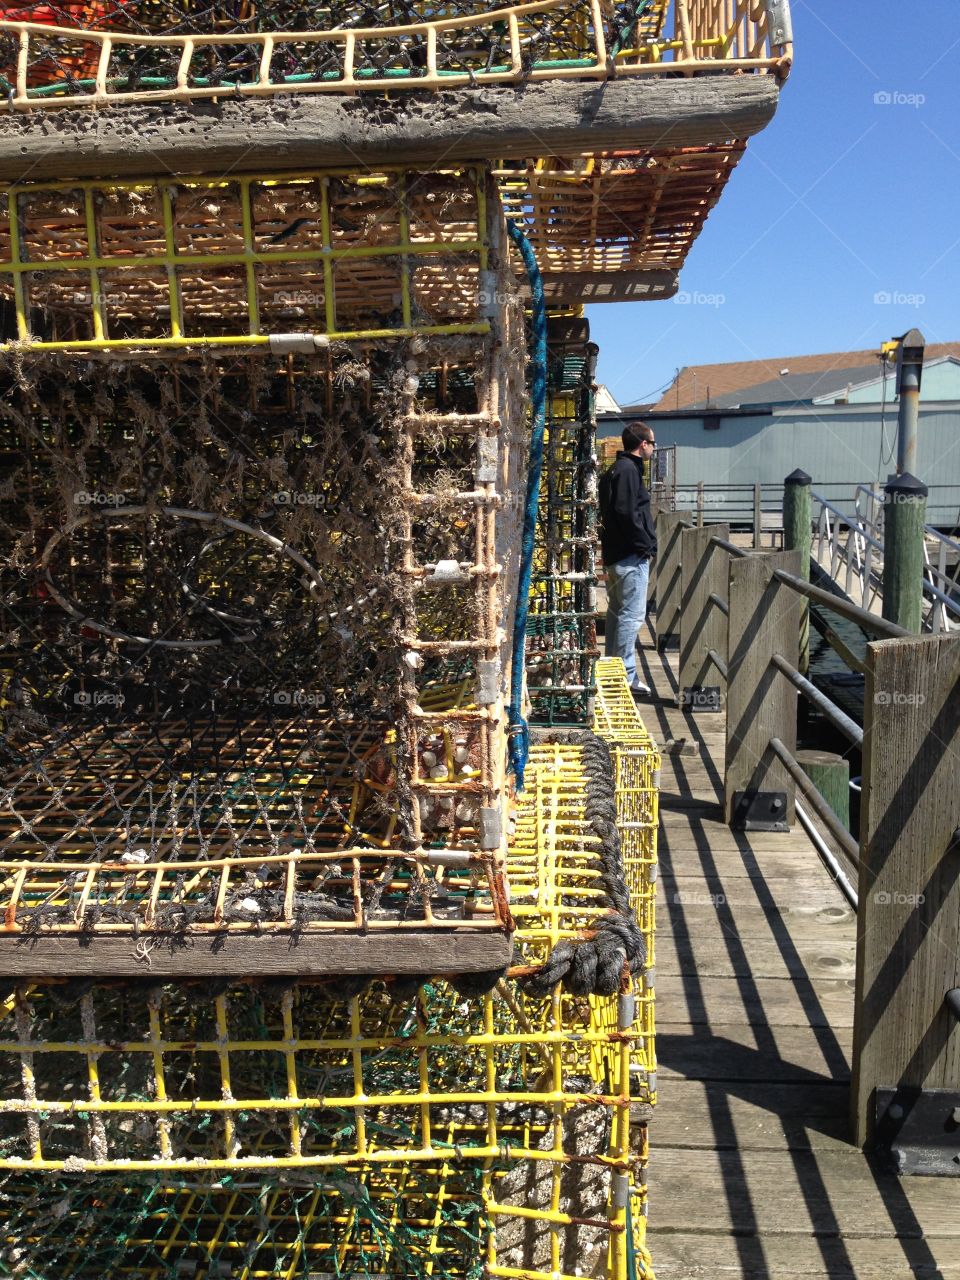 Lobster traps, deep sea catching, harbor viewing 